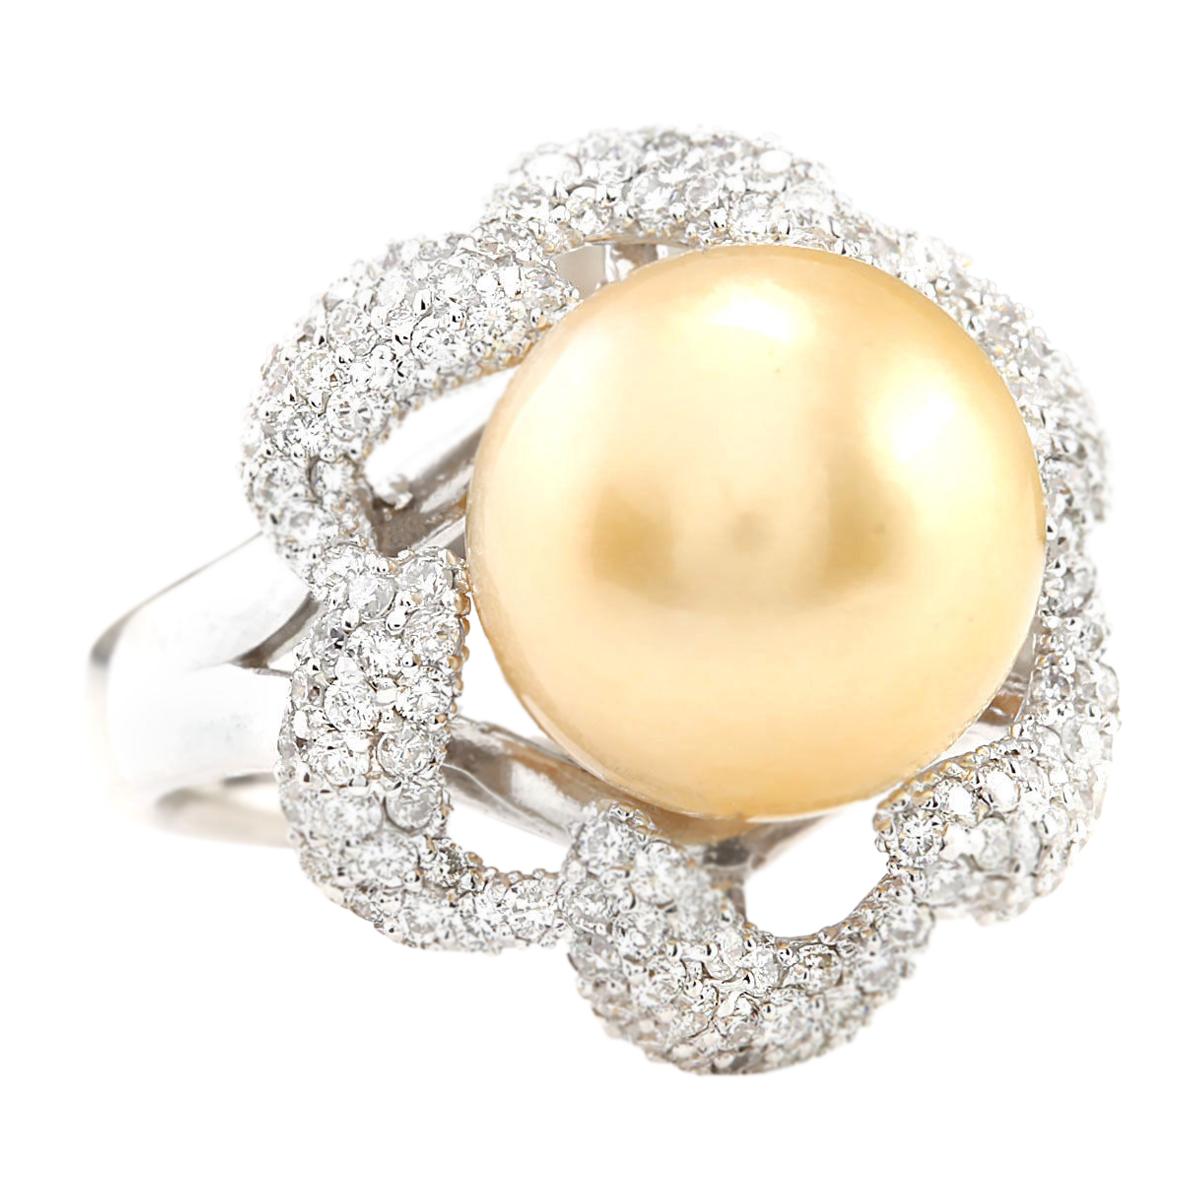 1.00 Carat Natural South Sea Pearl 14 Karat White Gold Diamond Ring
Stamped: 14K White Gold
Total Ring Weight: 8.0 Grams
Total Natural South Sea Pearl Weight is N/A (Measures: 12.00 mm)
Color: Gold
Diamond Weight: Total Natural Diamond Weight is